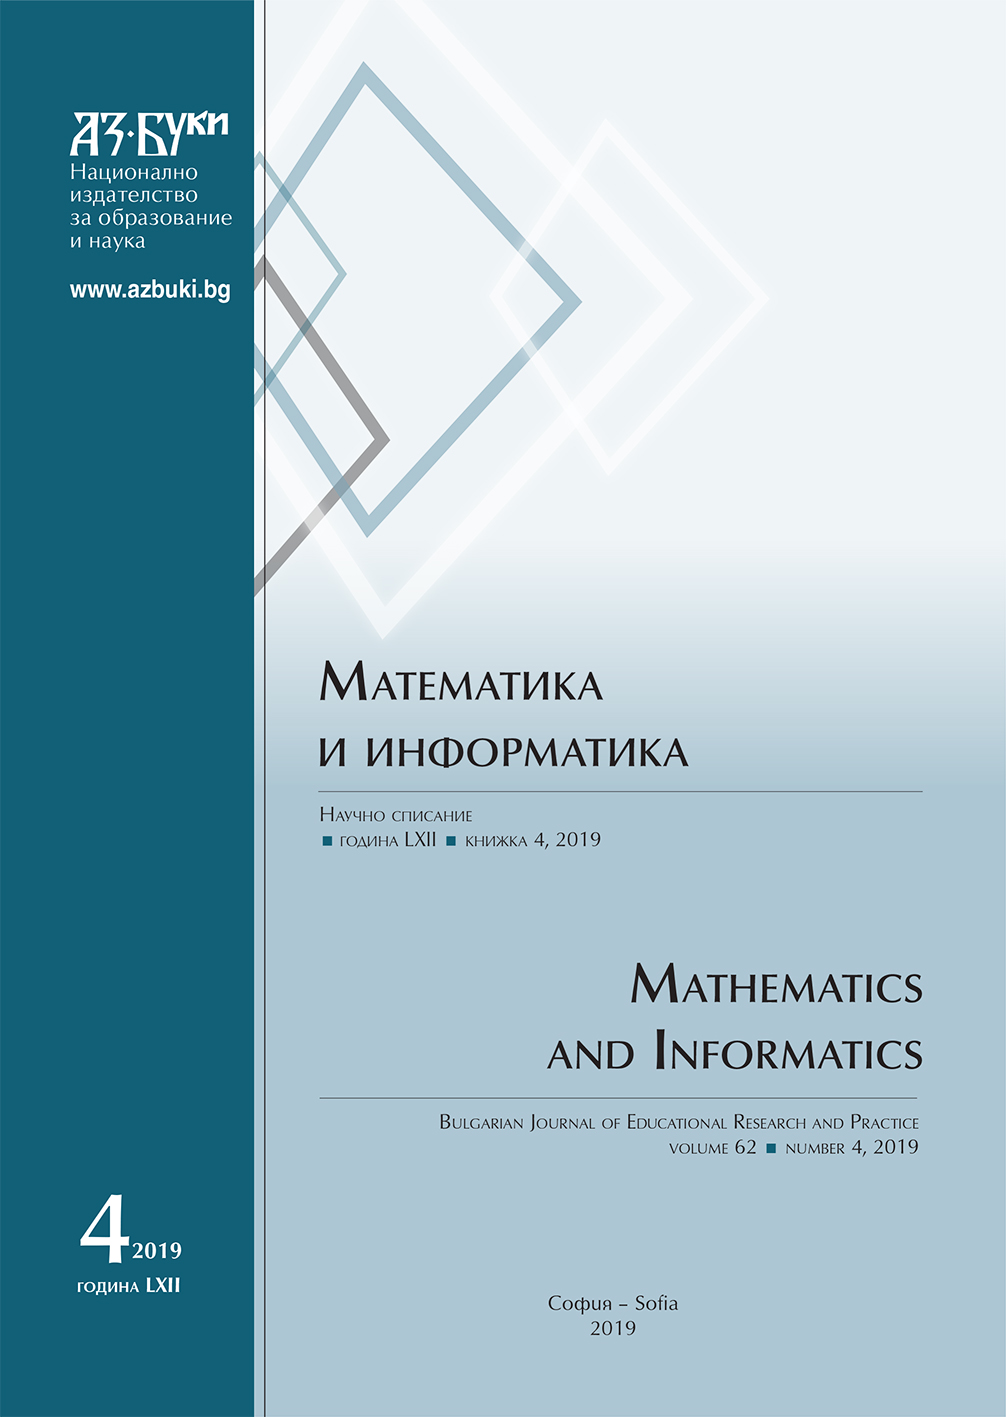 Polynomials with Multiple Roots in the Vertices of a Parallelogram Cover Image